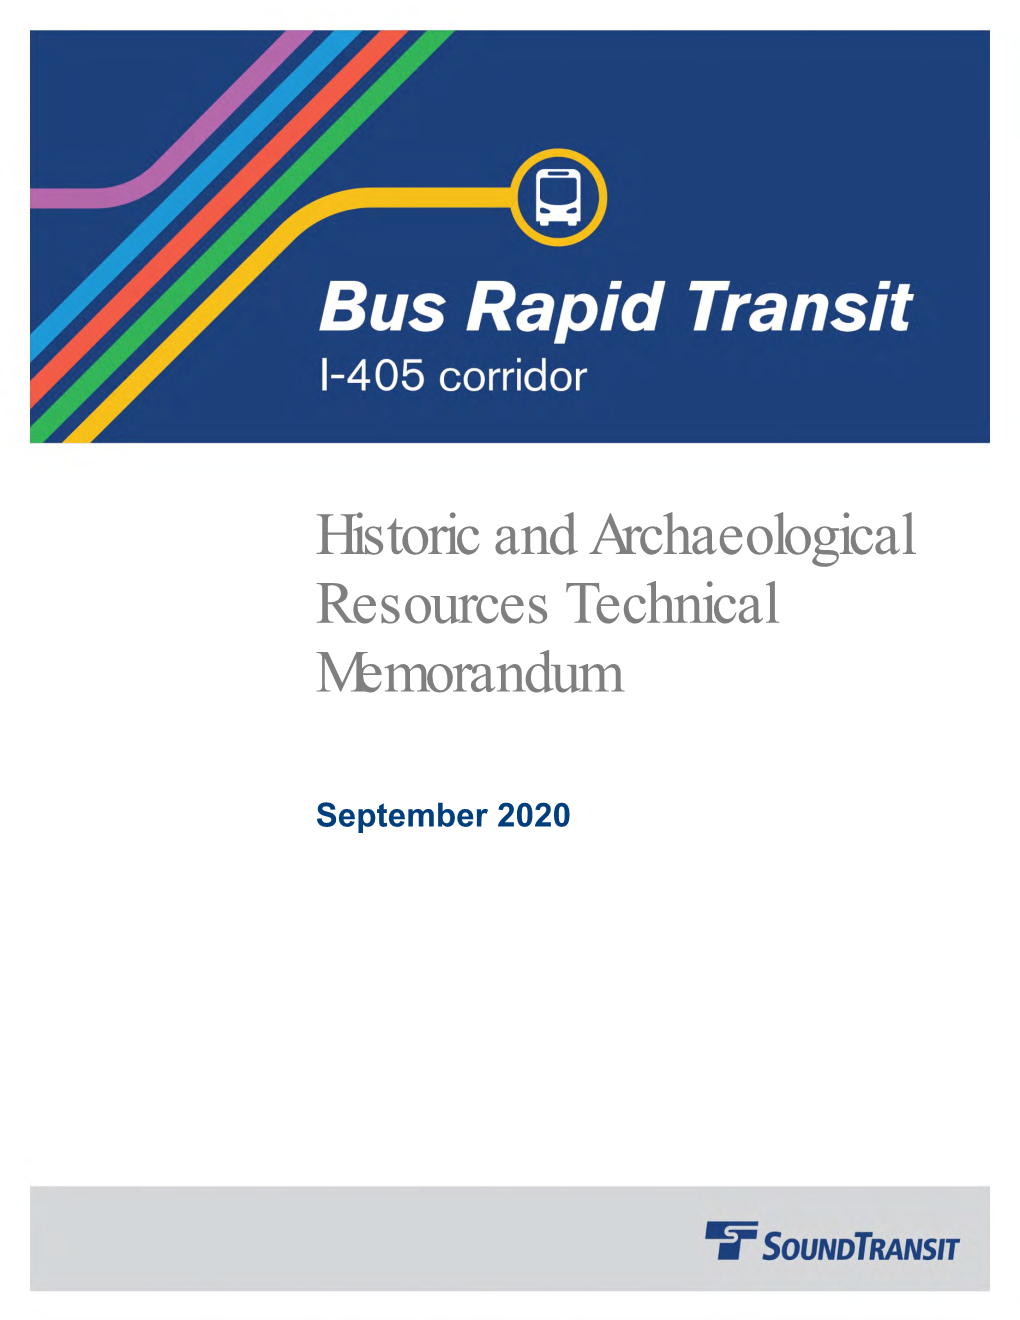 Historic and Archaeological Resources Technical Memorandum September 2020